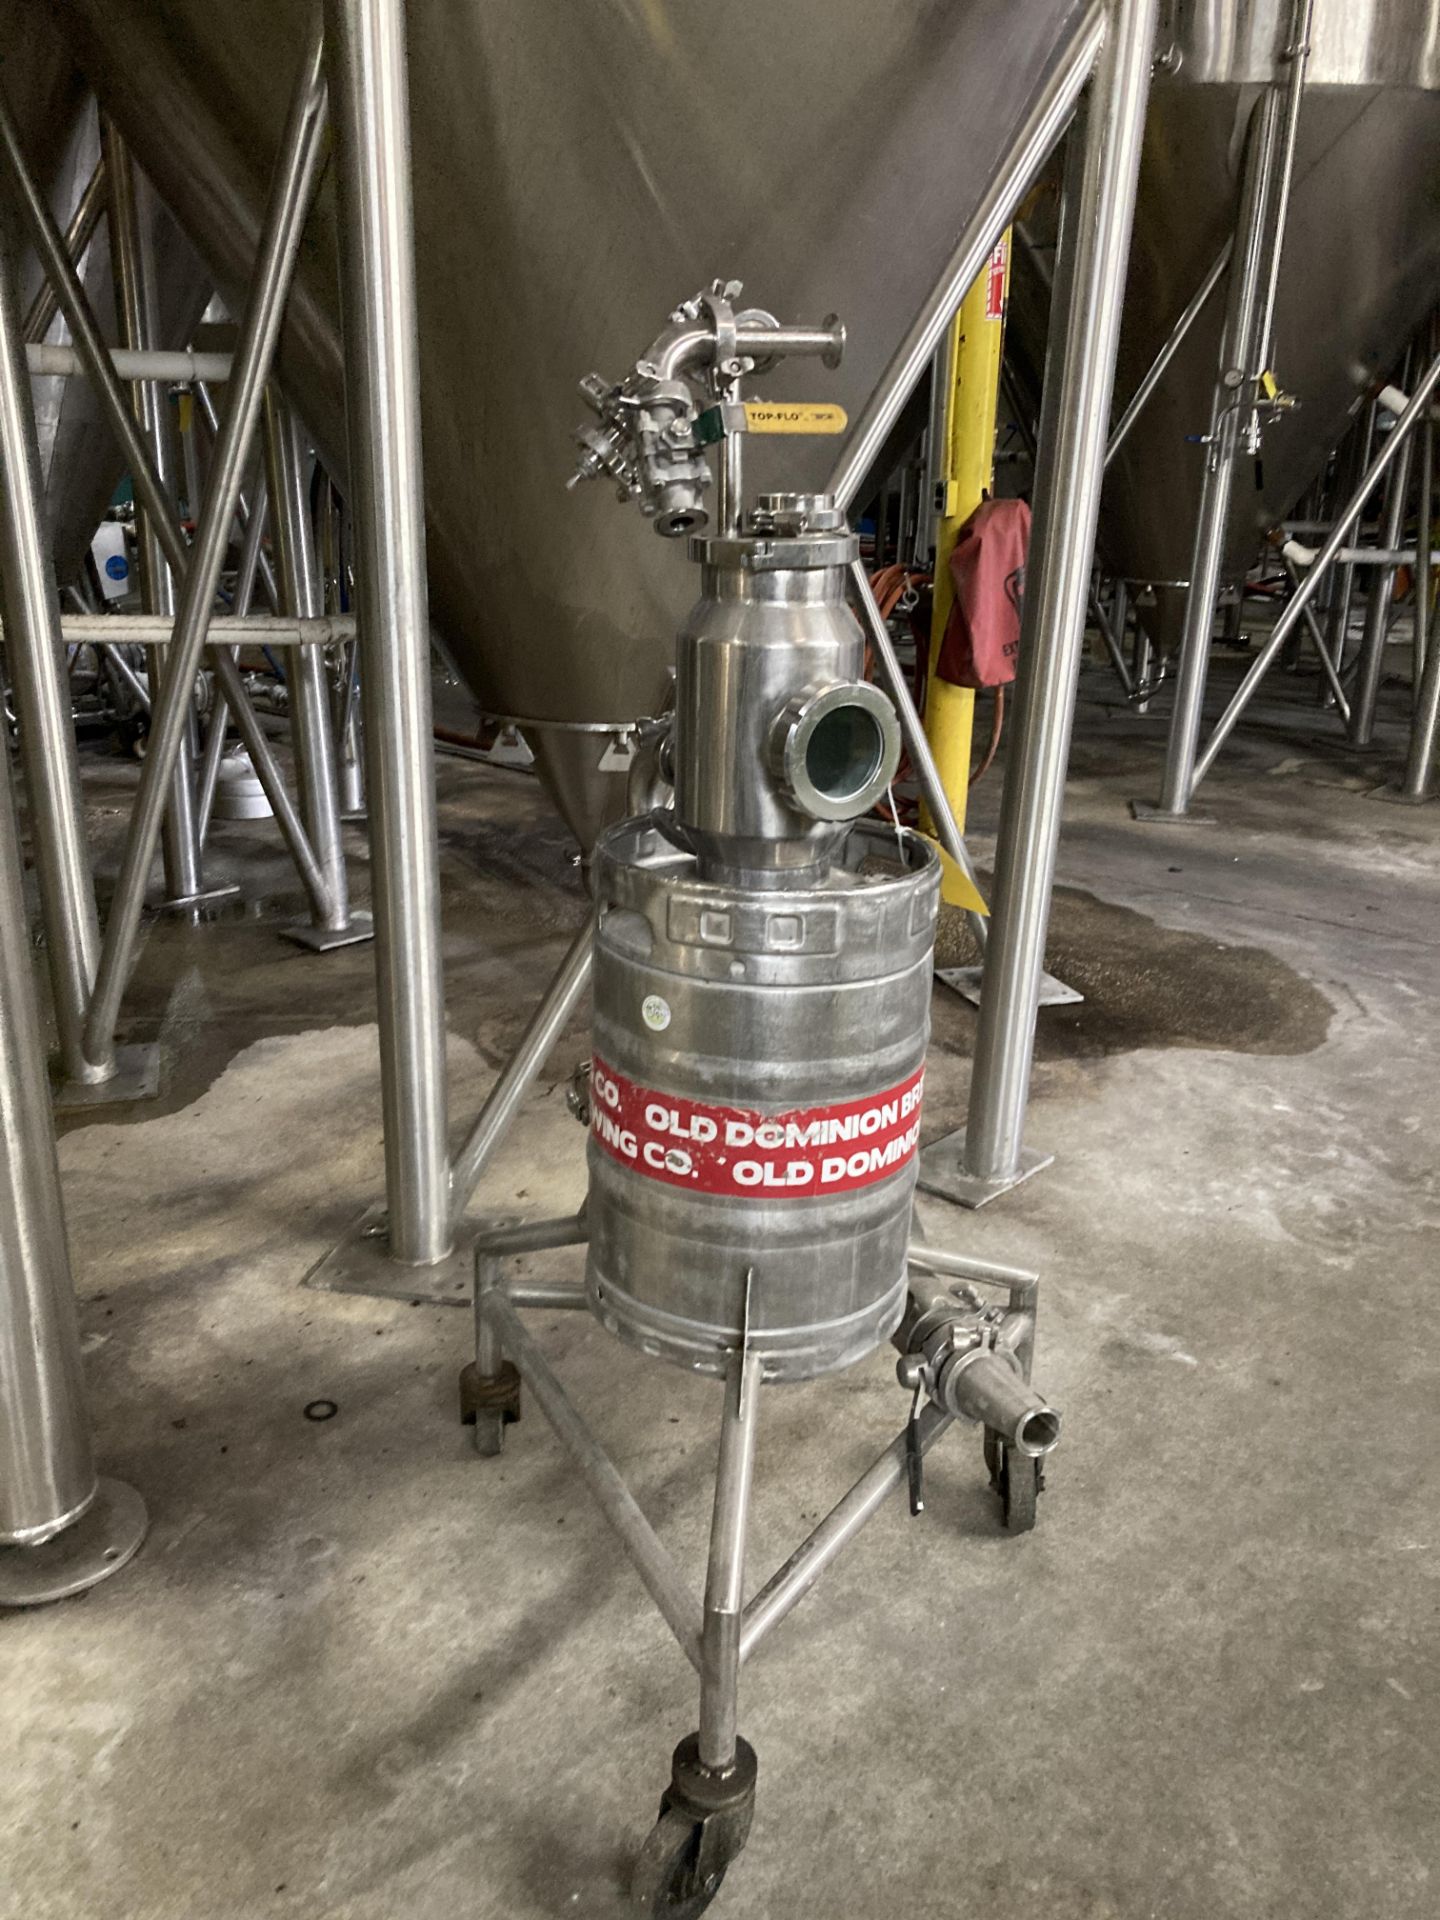 Retrofit 1/2 barrel keg with castor ***Rigging and Loading Fee of$: TBD will be automatically